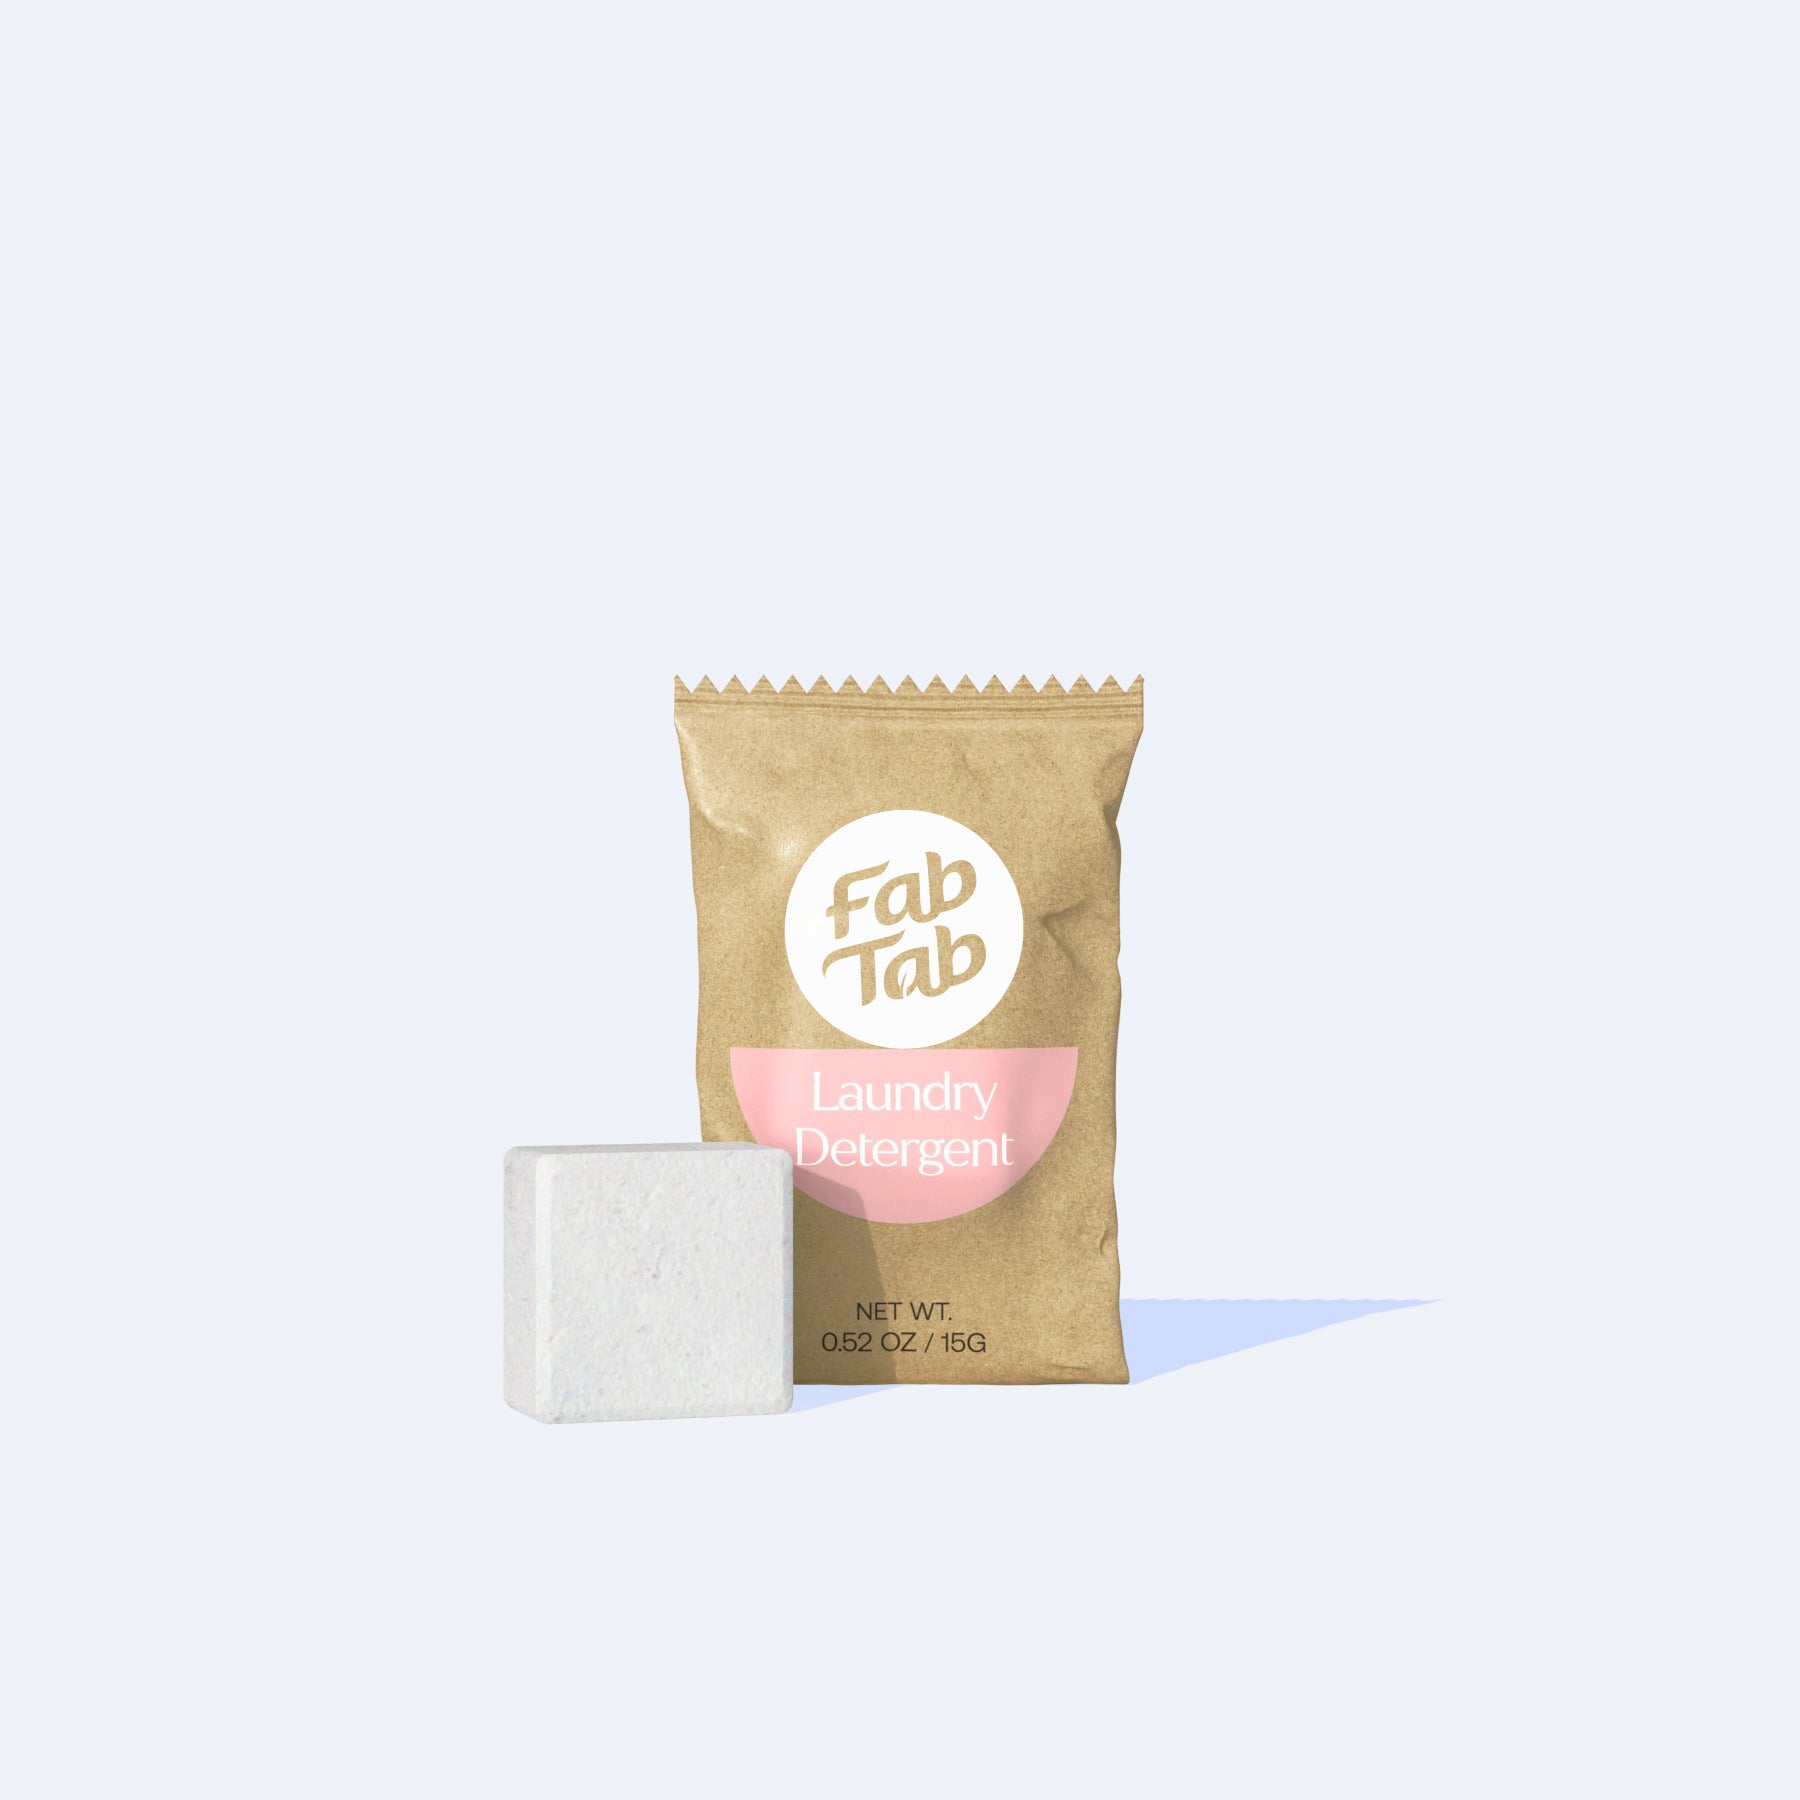 Load video: &lt;p&gt;FabTab’s laundry detergent tablet is a non-toxic solution that kicks stains to the curb and smells like an absolute delight, all without a smidge of plastic in sight! And fear not, your vibrant colors are in good hands.&lt;/p&gt;